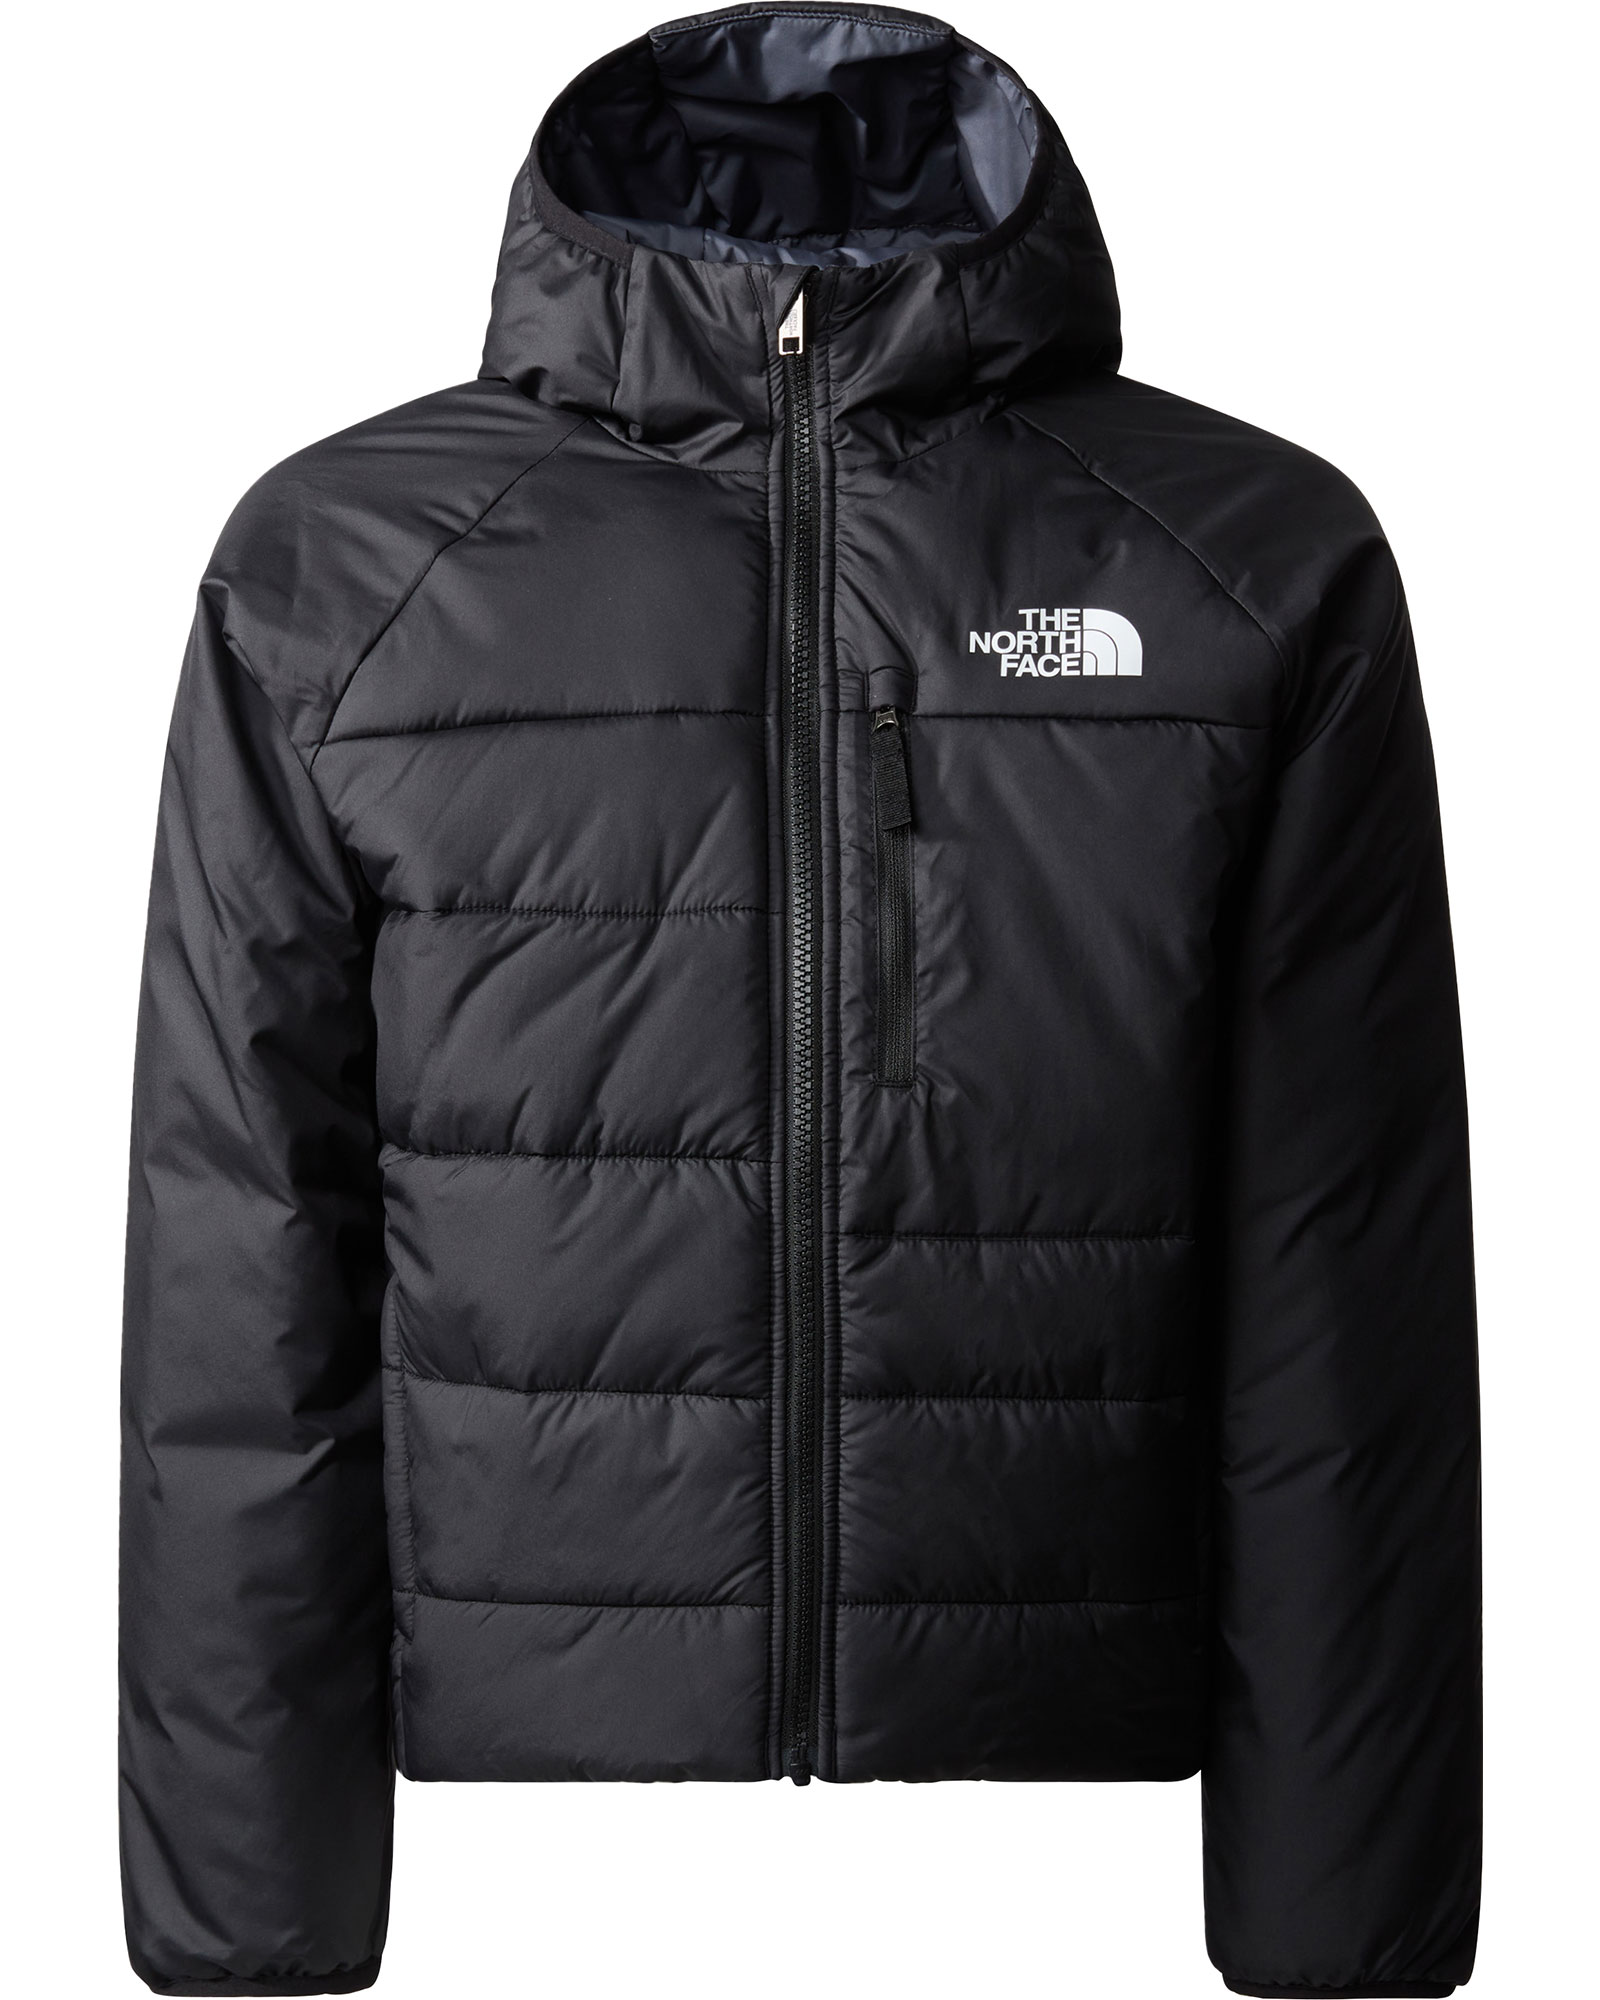 The North Face Boy’s Reversible Perrito Insulated Jacket XL - TNF Black XL